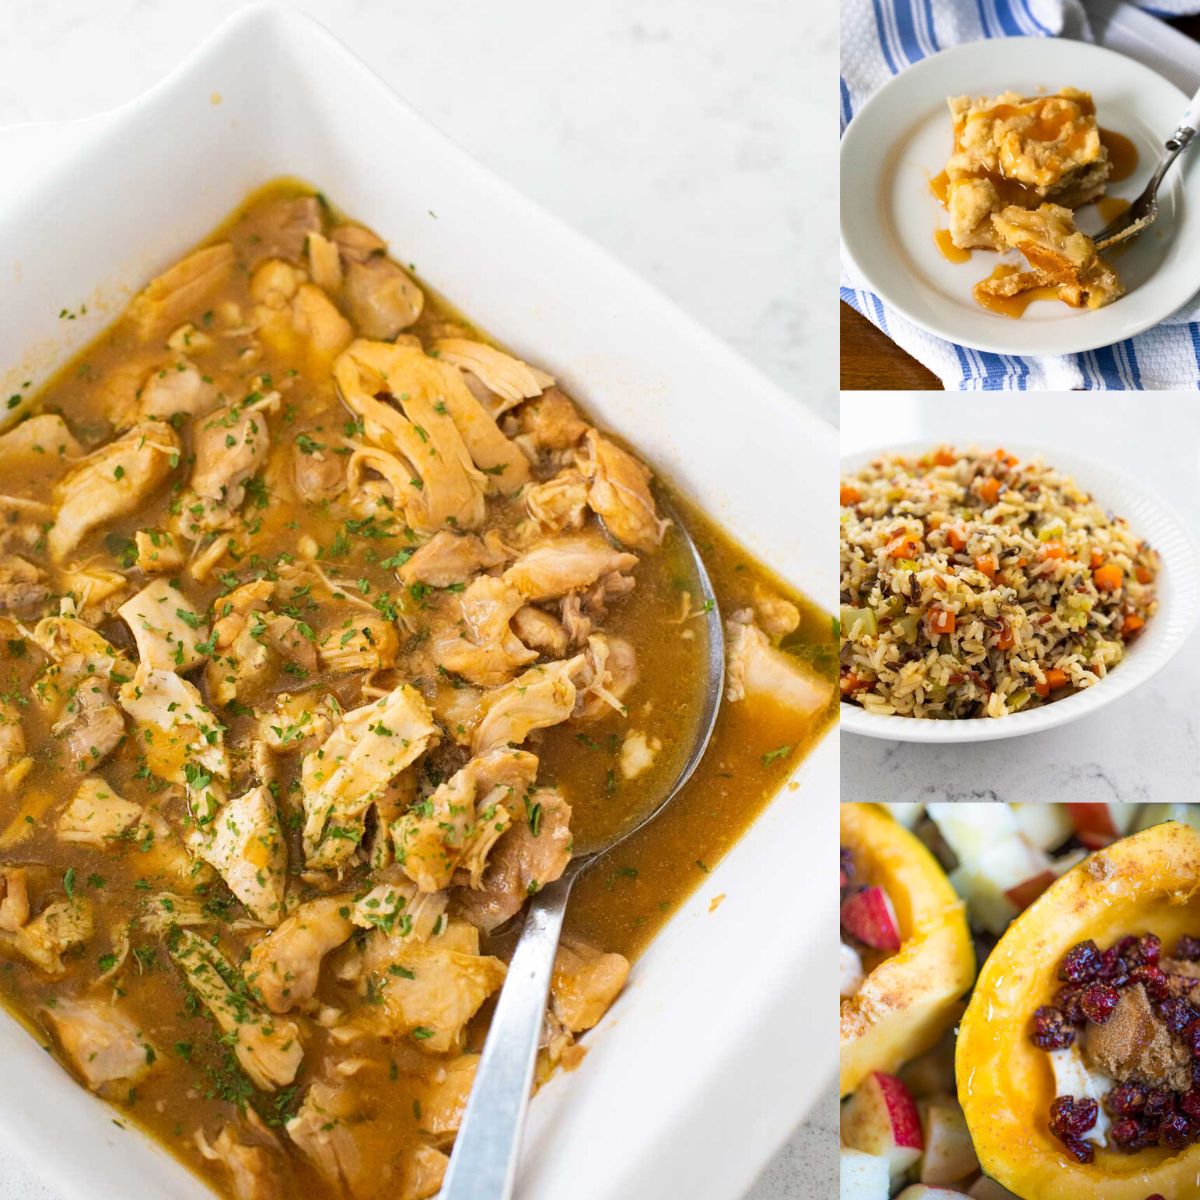 The photo collage shows 4 Rosh Hashanah recipes including apricot chicken, apple bars, wild rice pilaf, and acorn squash with pomegranate seeds.